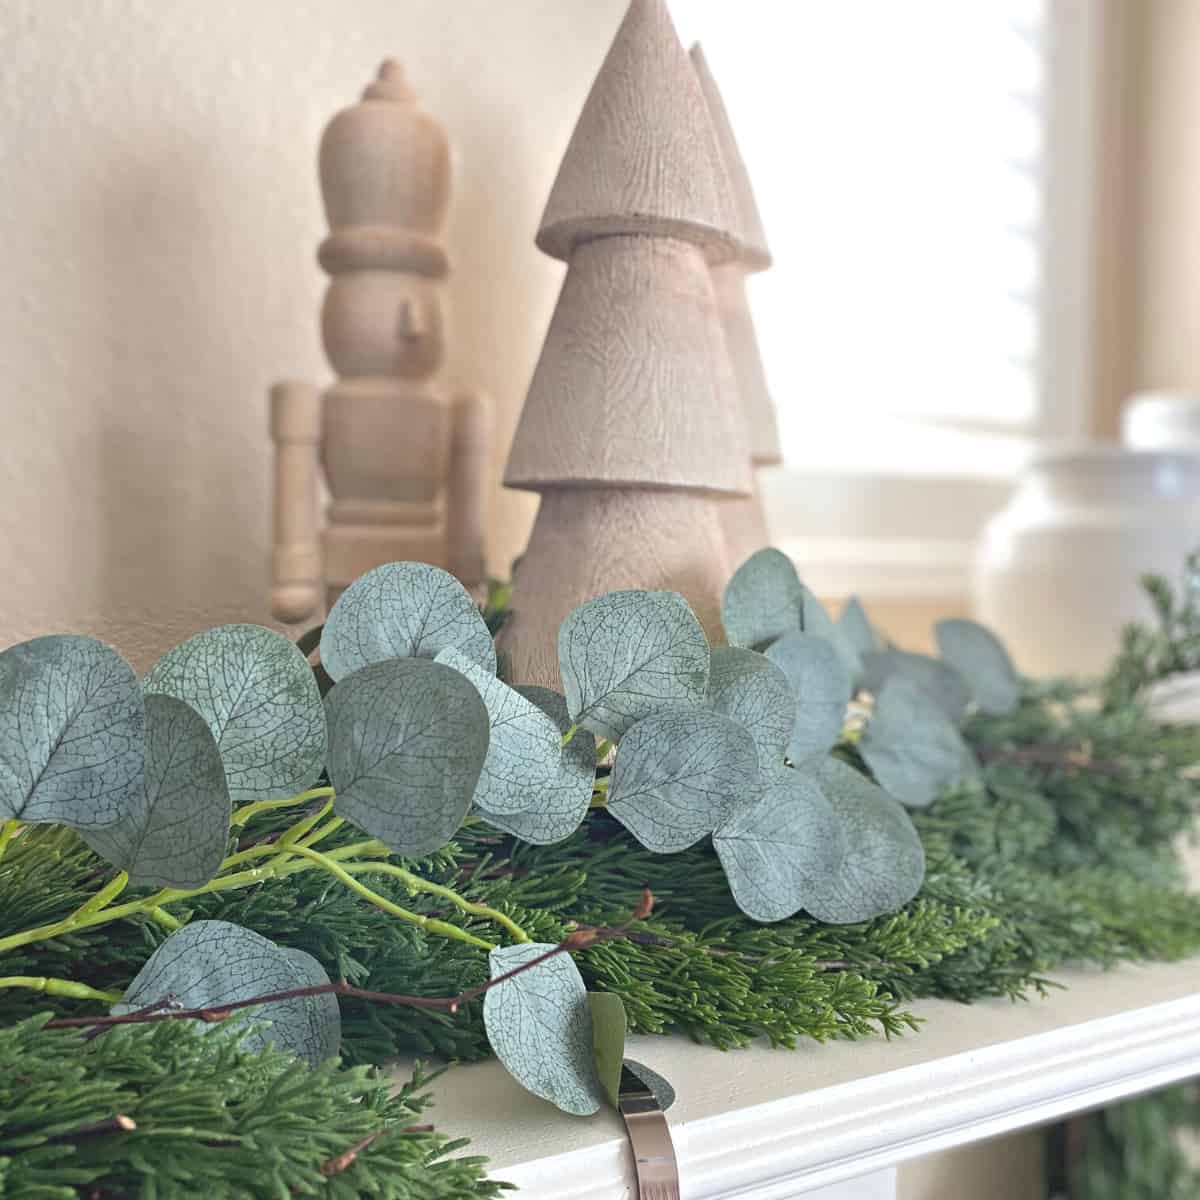 Wooden holiday tree and nutcracker with garland beneath